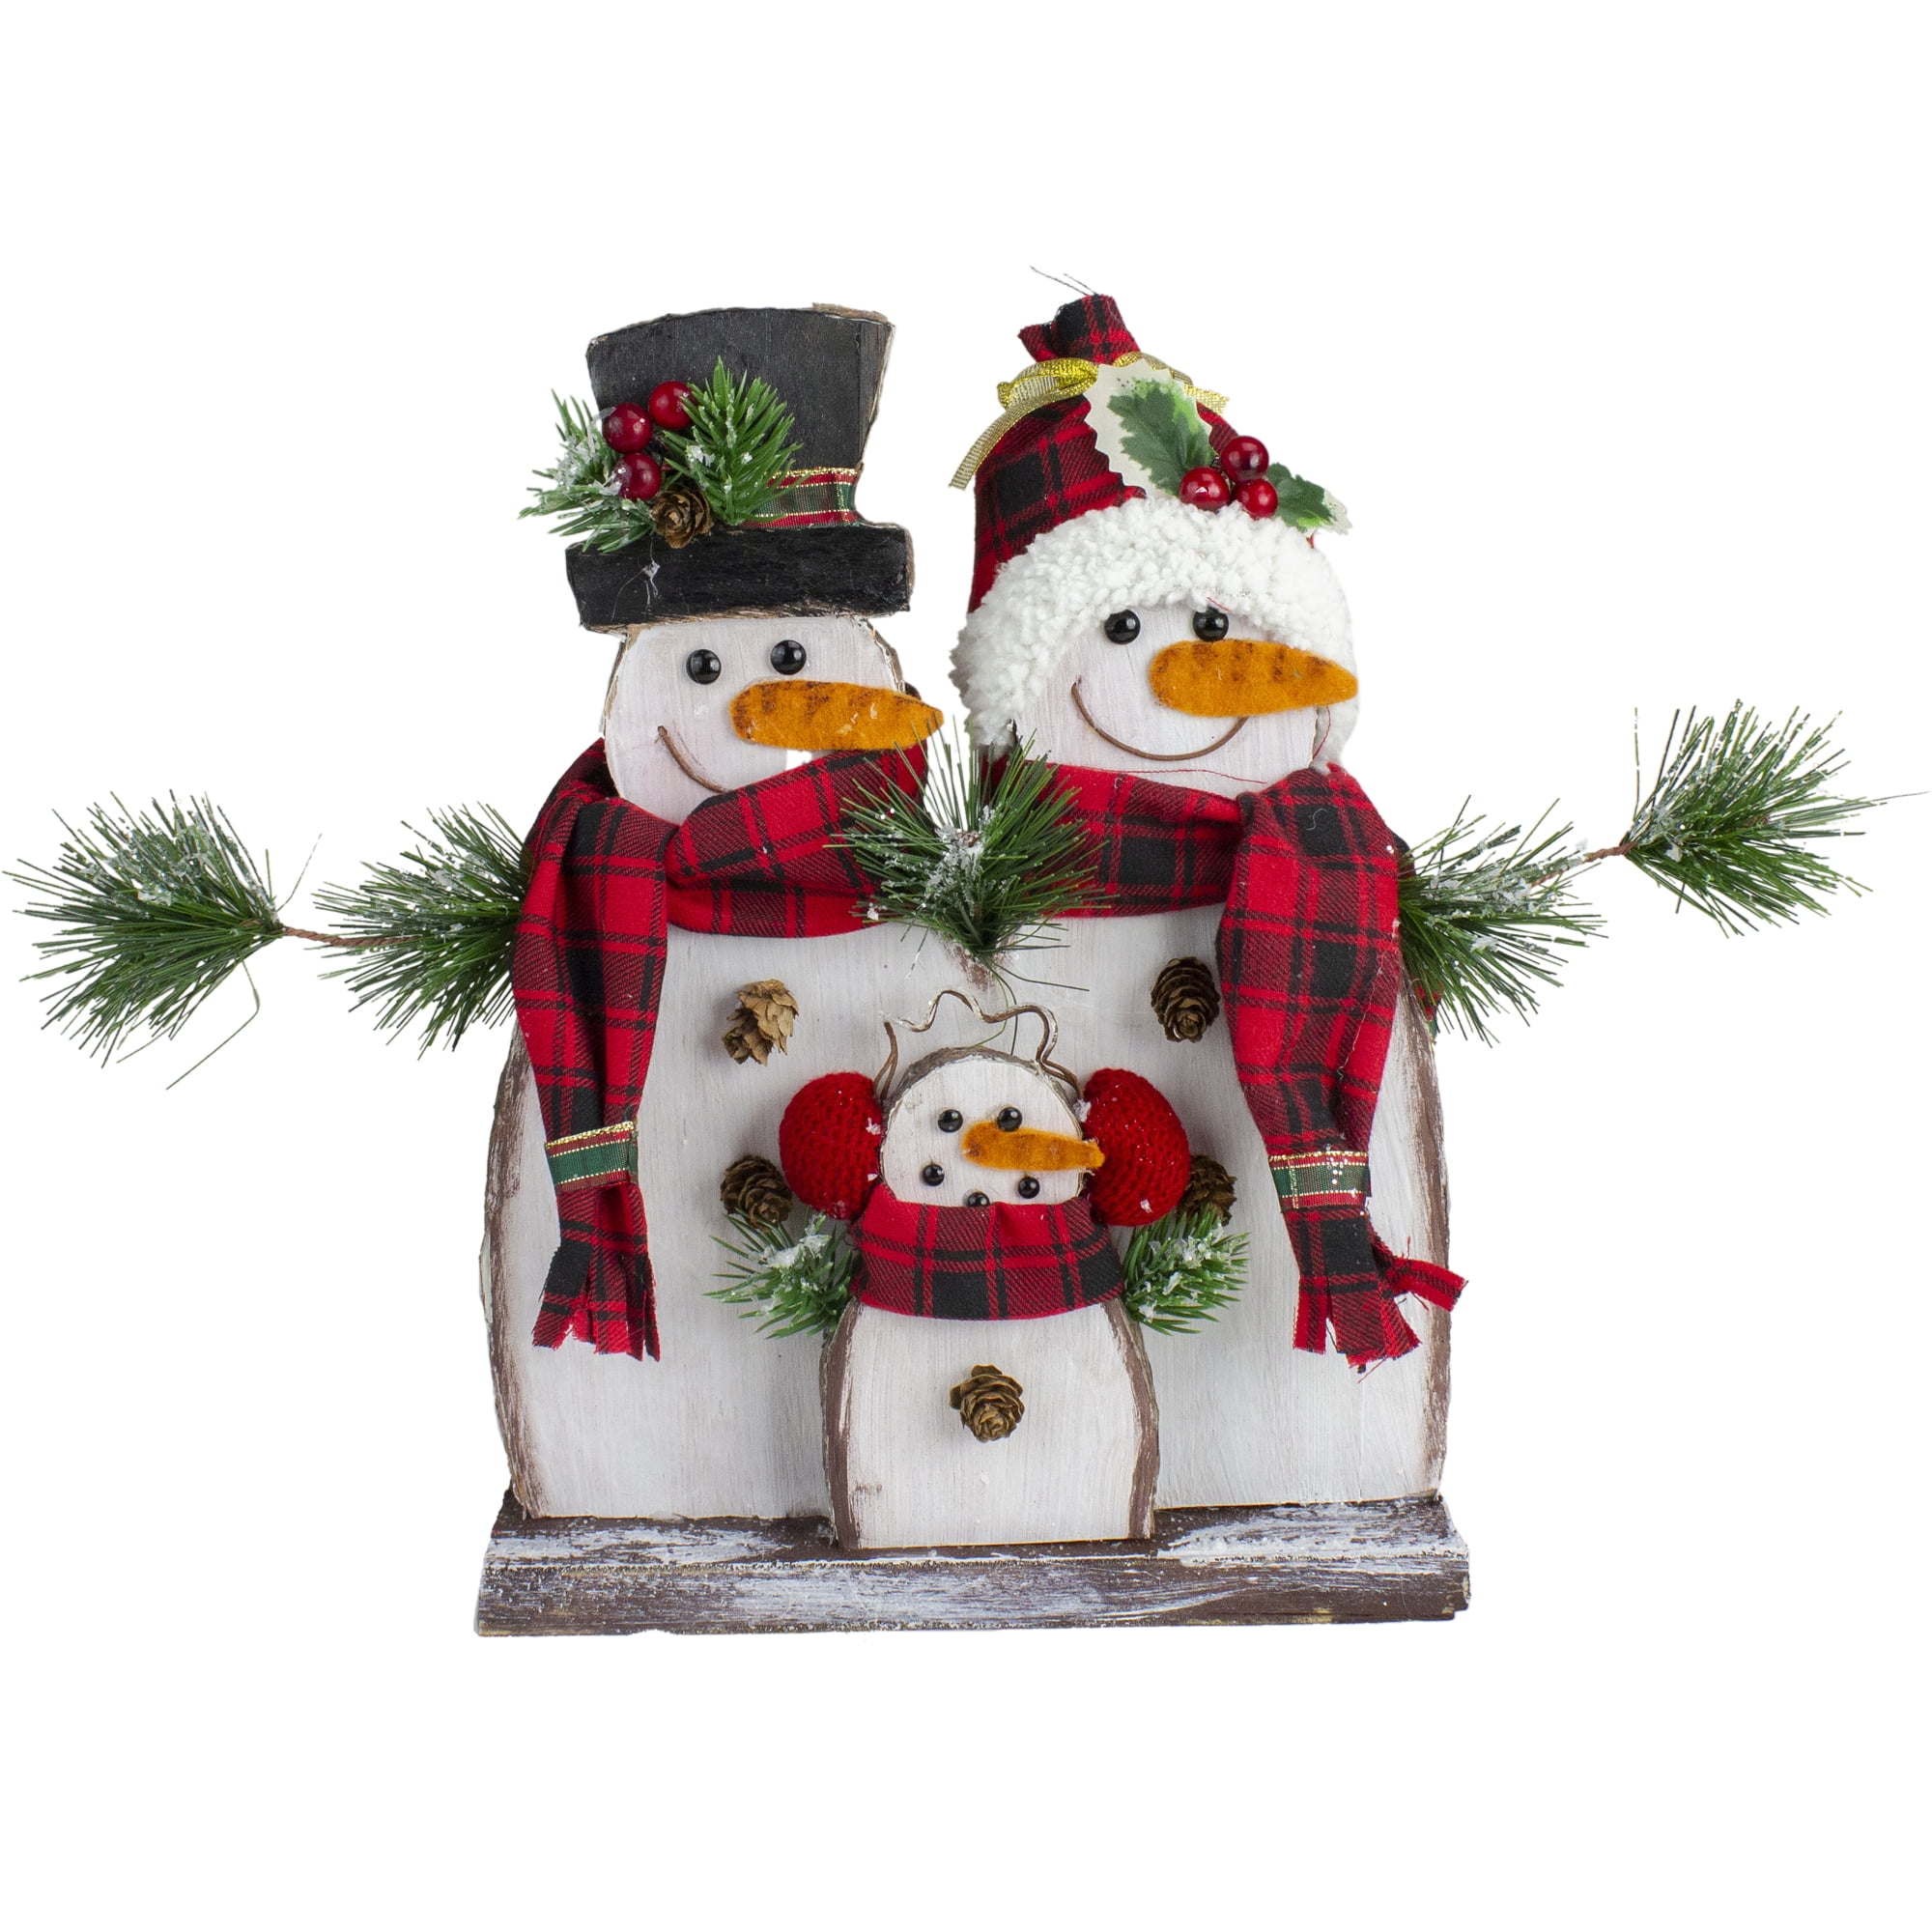 Tabletop Christmas Decoration Rustic Snowman with Snowballs 